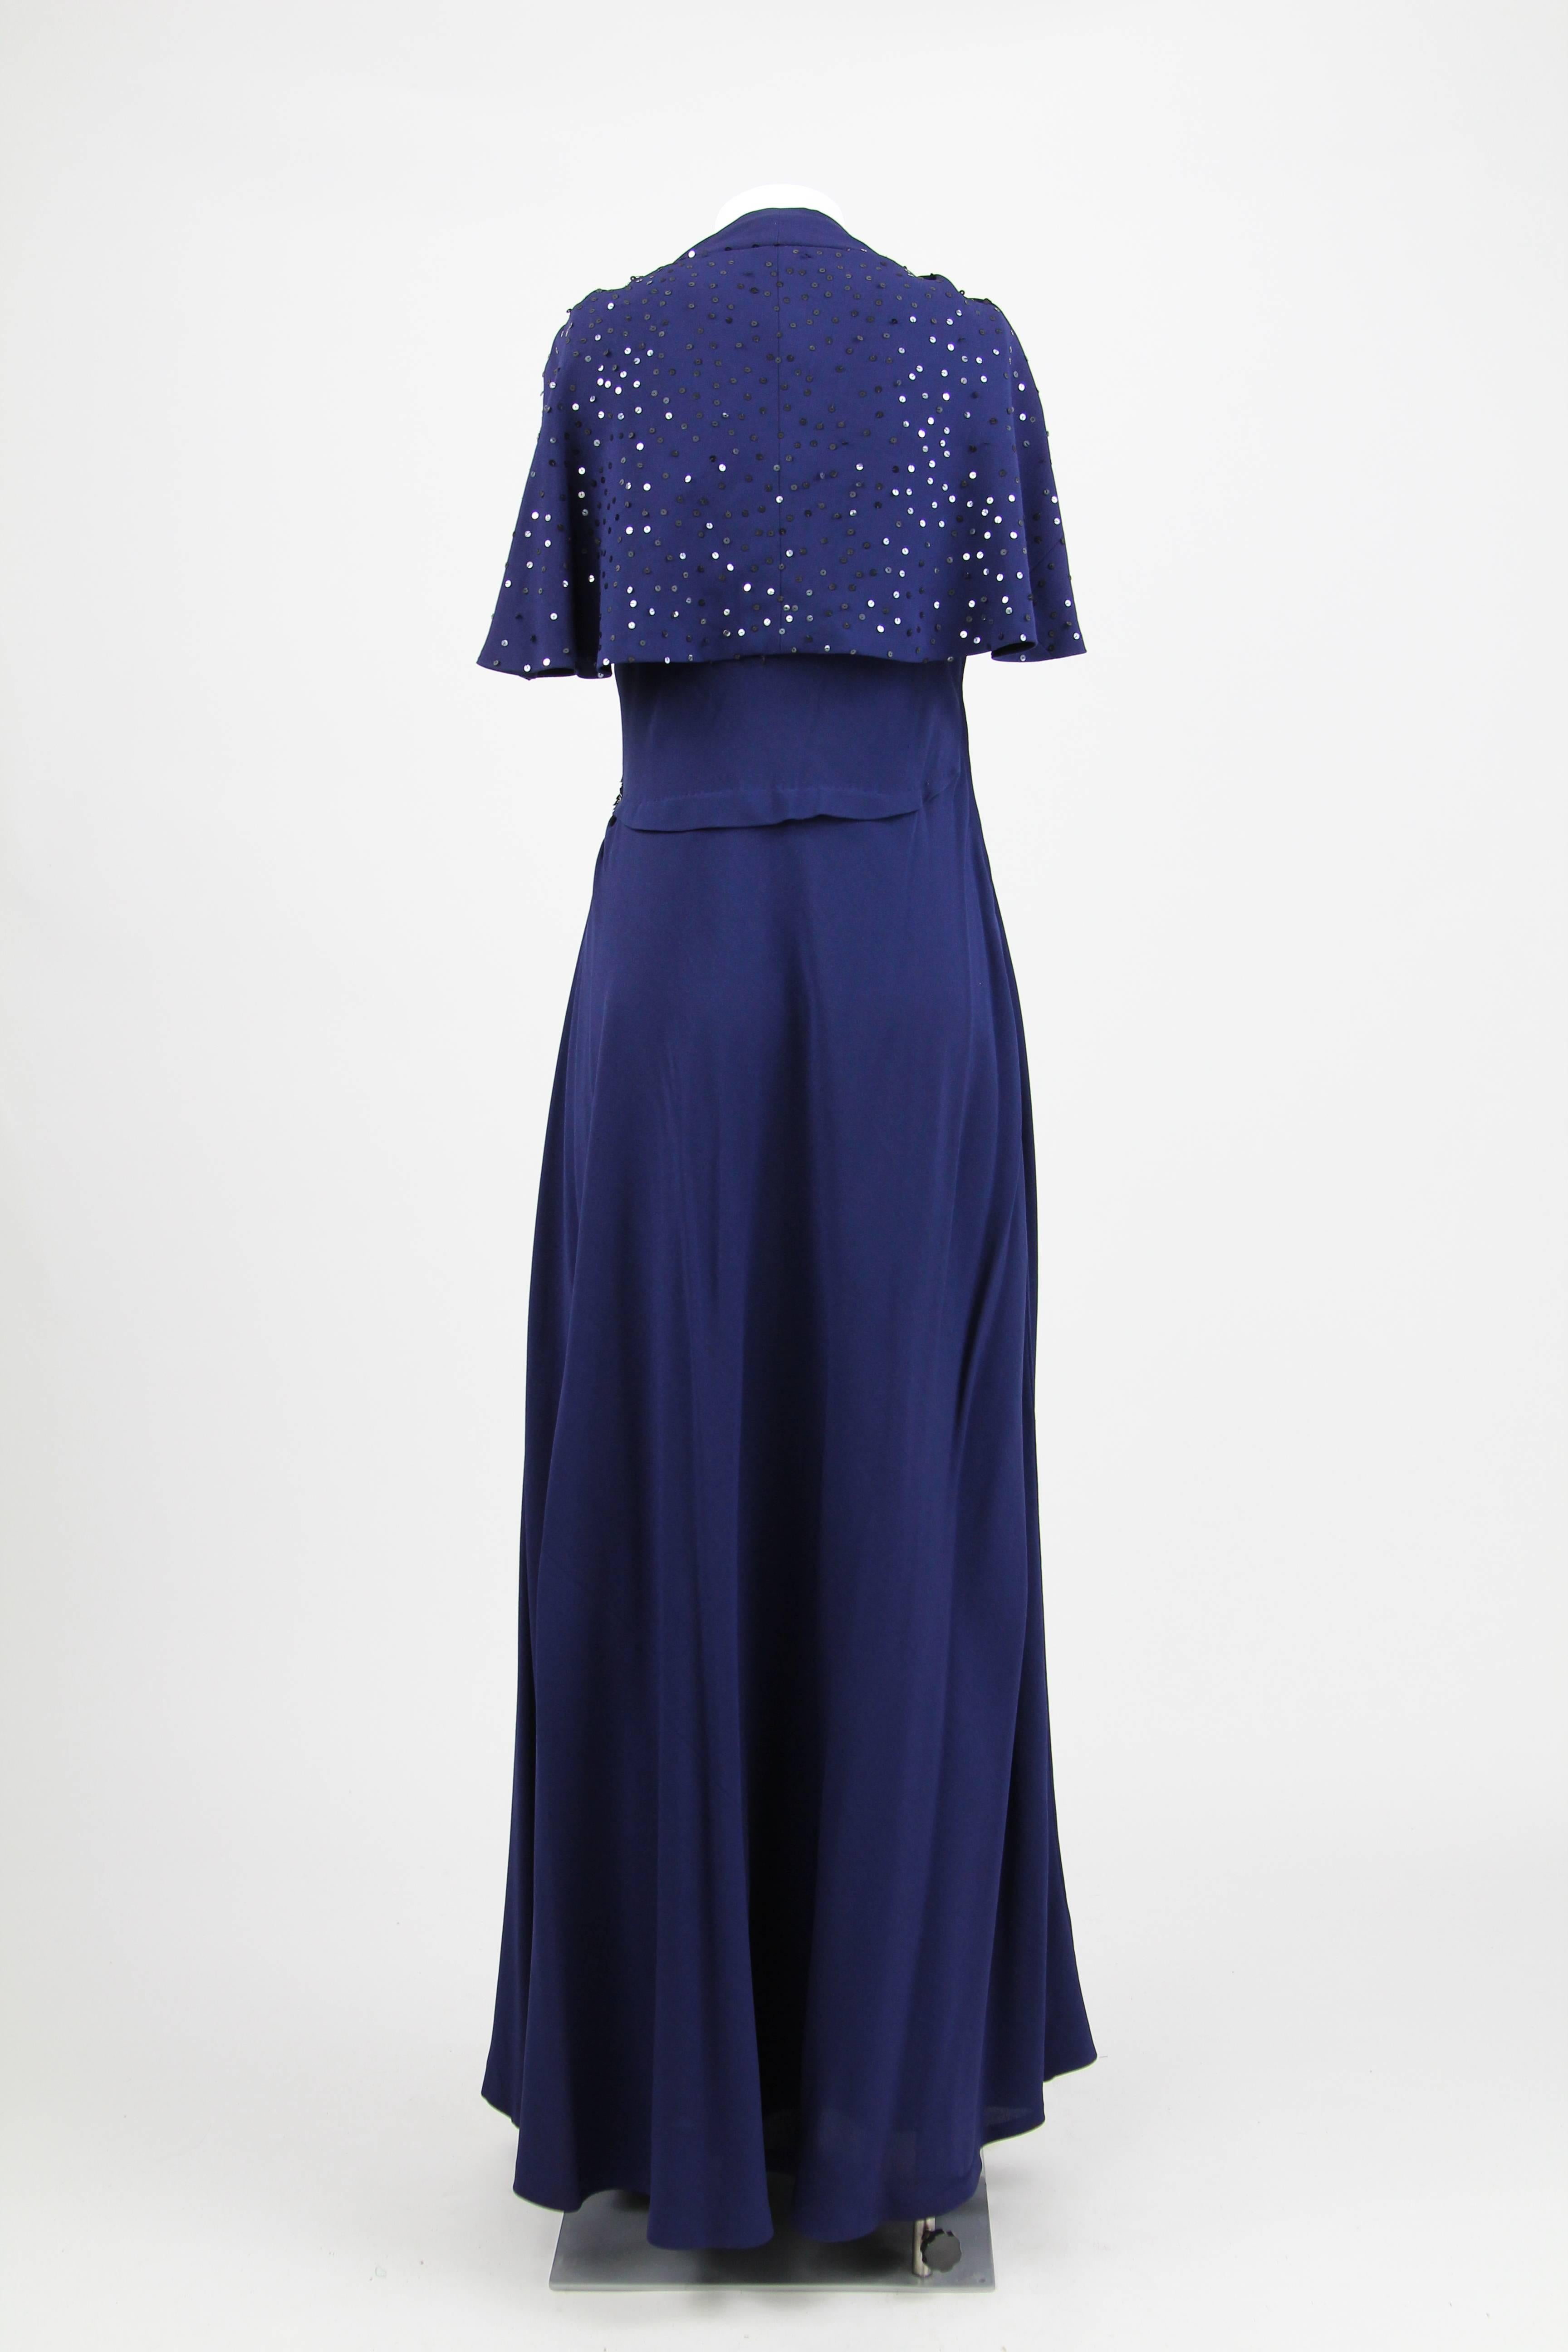 Elegant dark blue draped evening dress, featuring sequin embellishments and a back cut - out covered by an integrated shawl. Carefully handmade in Italy.
Viscose fabric.
Size 40 IT.
This piece is in very good conditions with no signs of wear.
